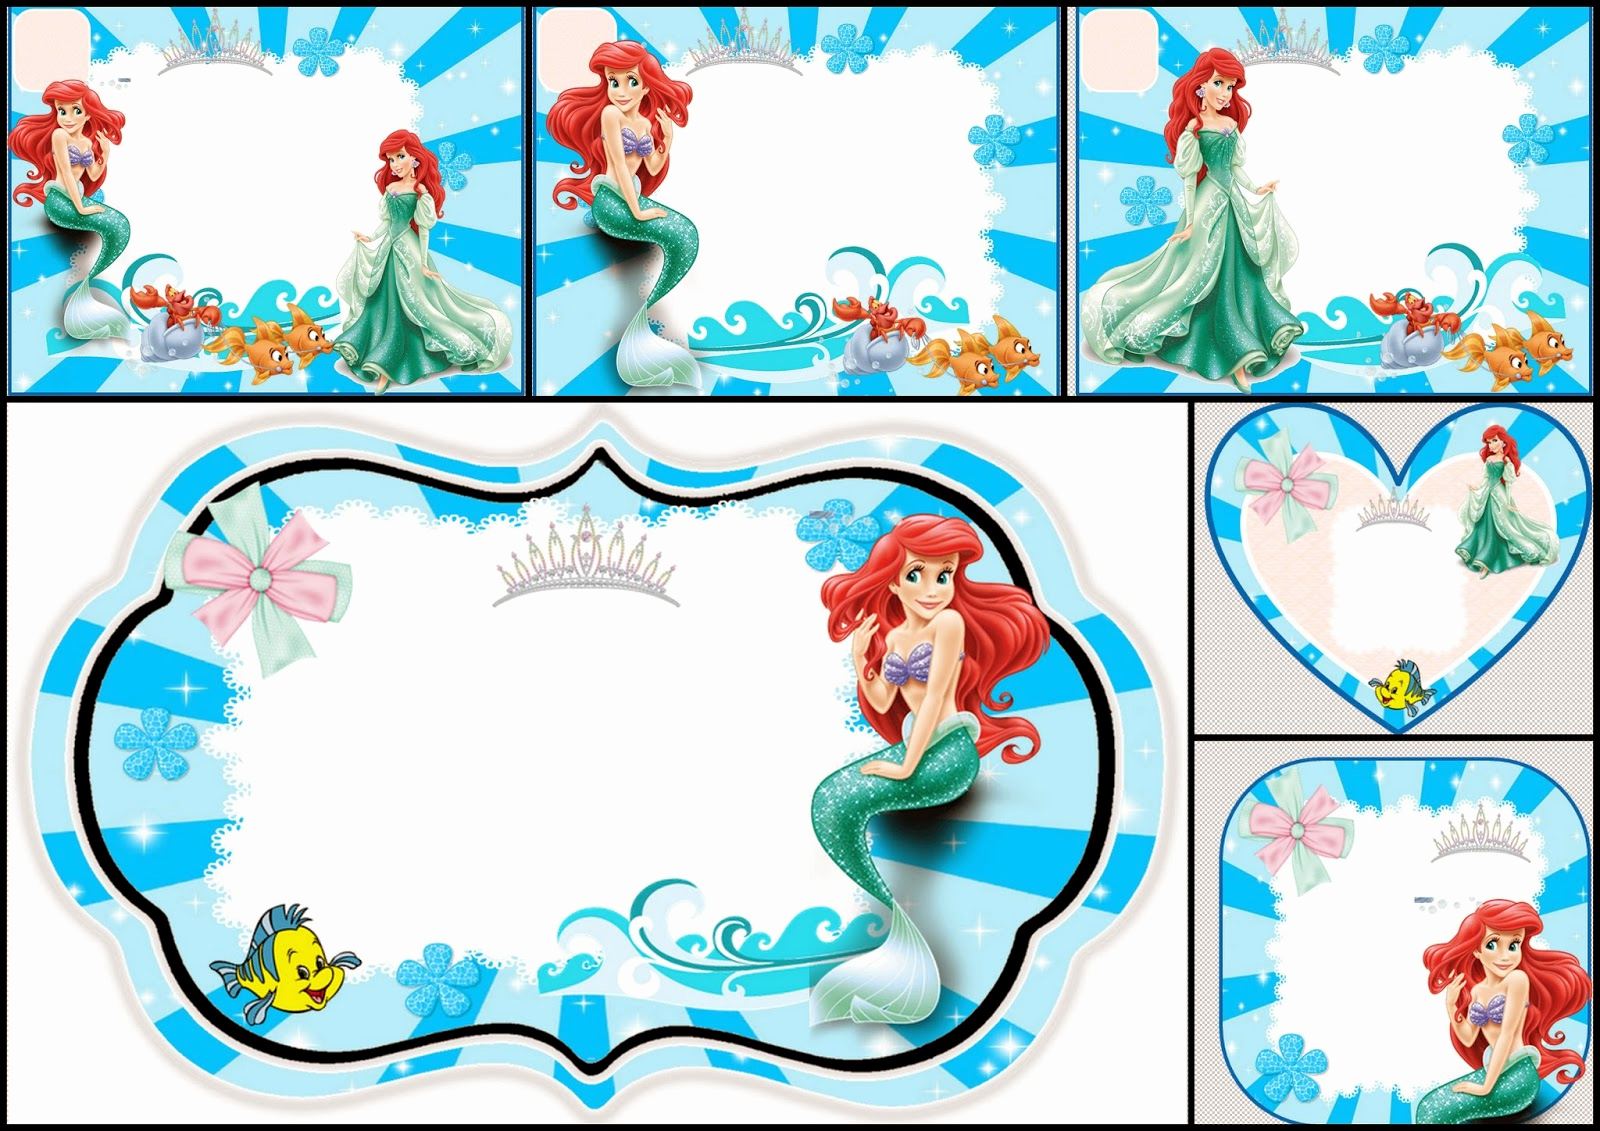 Ariel Invitation Template Free Best Of the Little Mermaid Free Printable Invitations Cards or